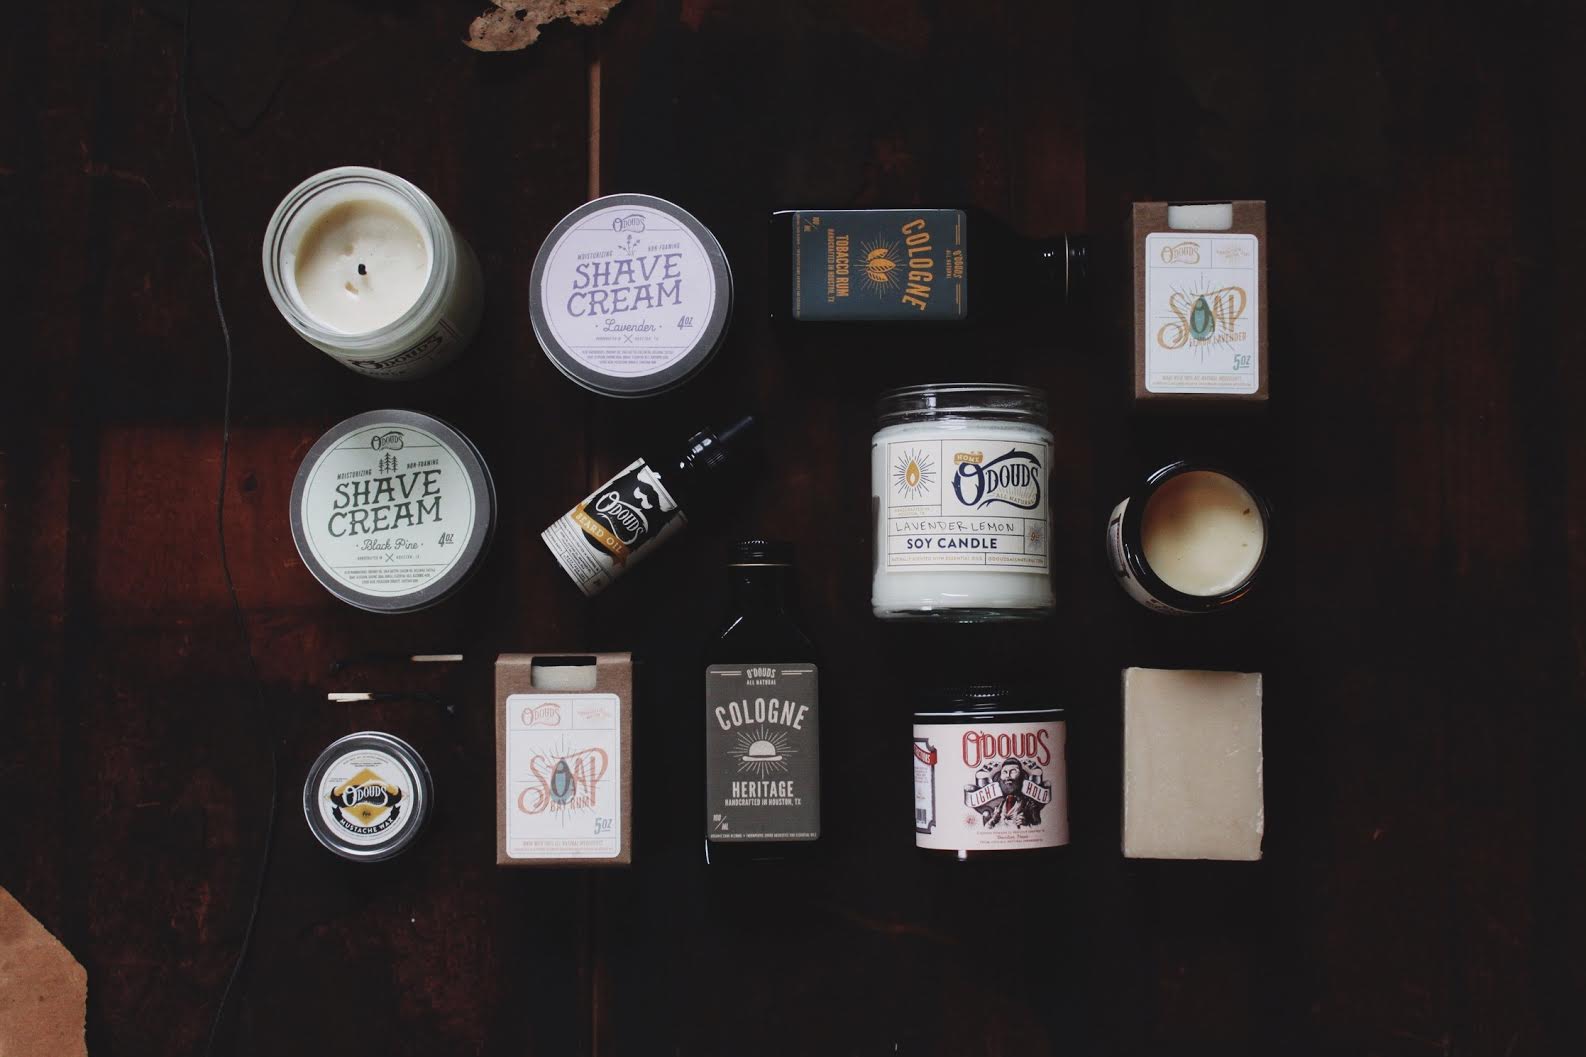 assortment of new O douds cologne, soap, wax and pomade